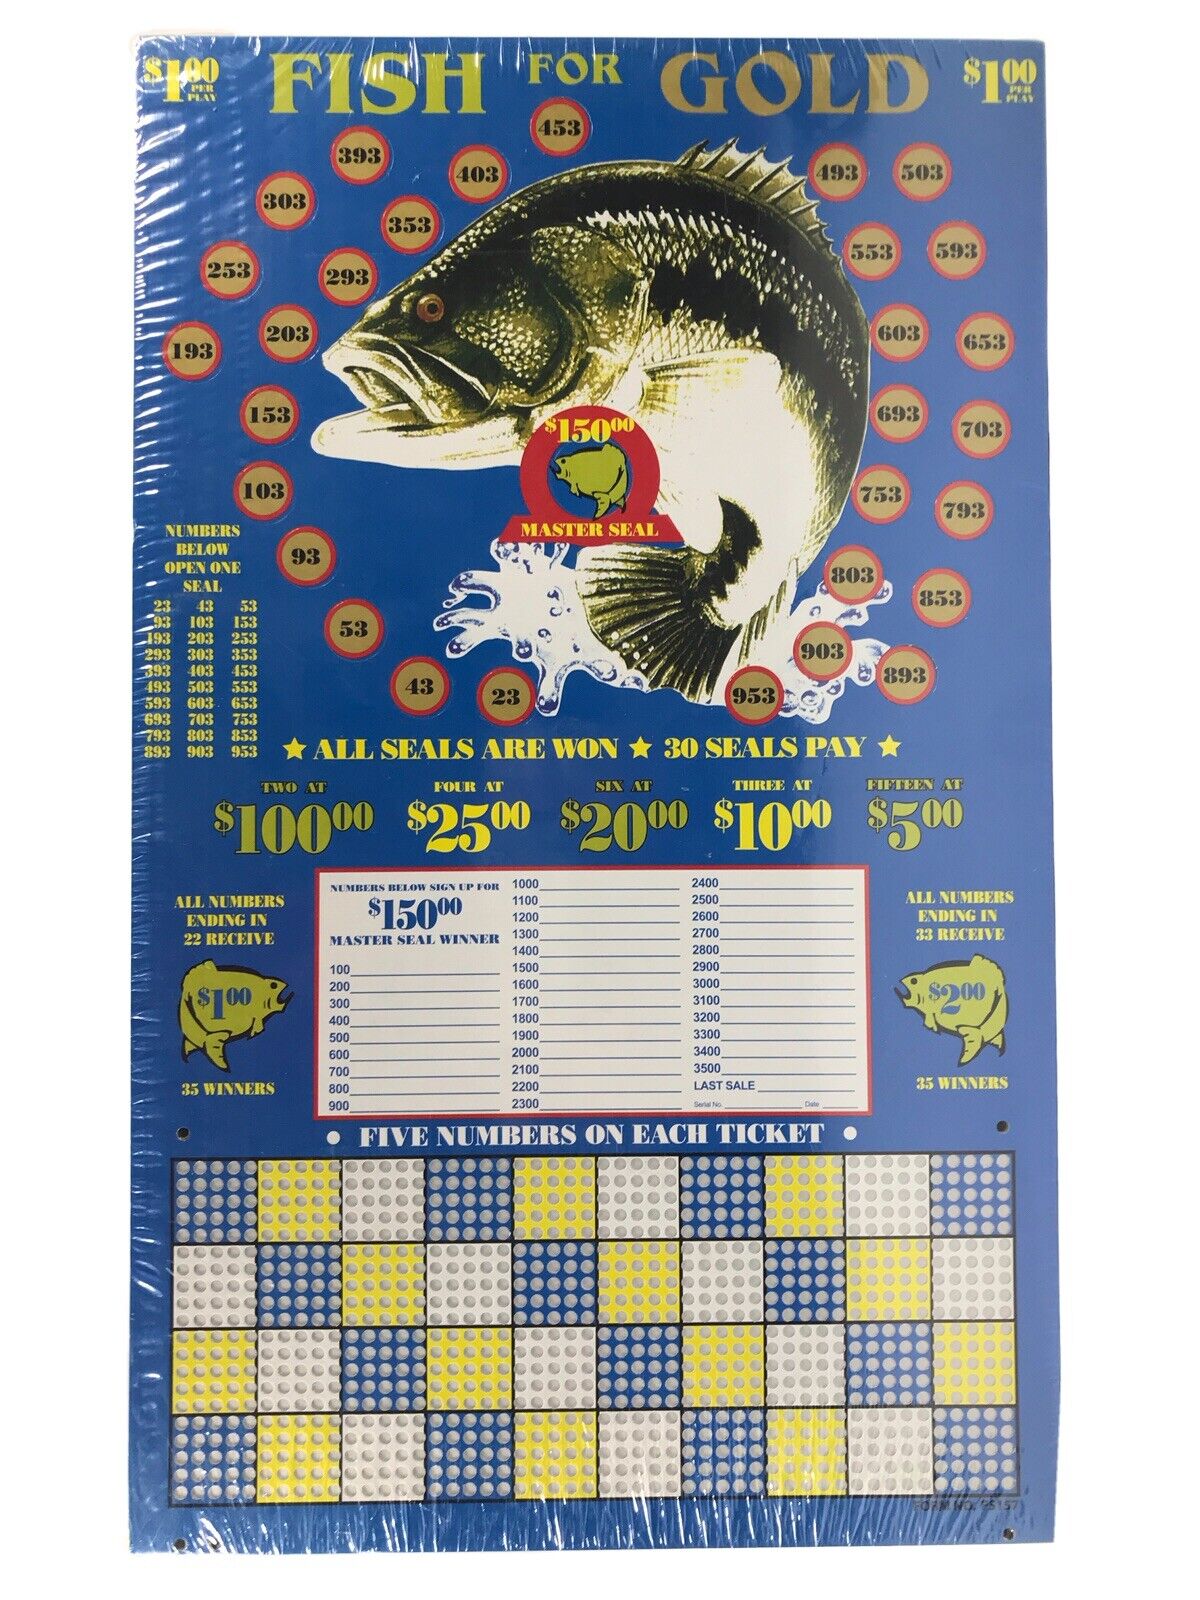 $1.00 FISH For GOLD Game Punch Card Money Board Raffle Gambling Large 1000 Hole